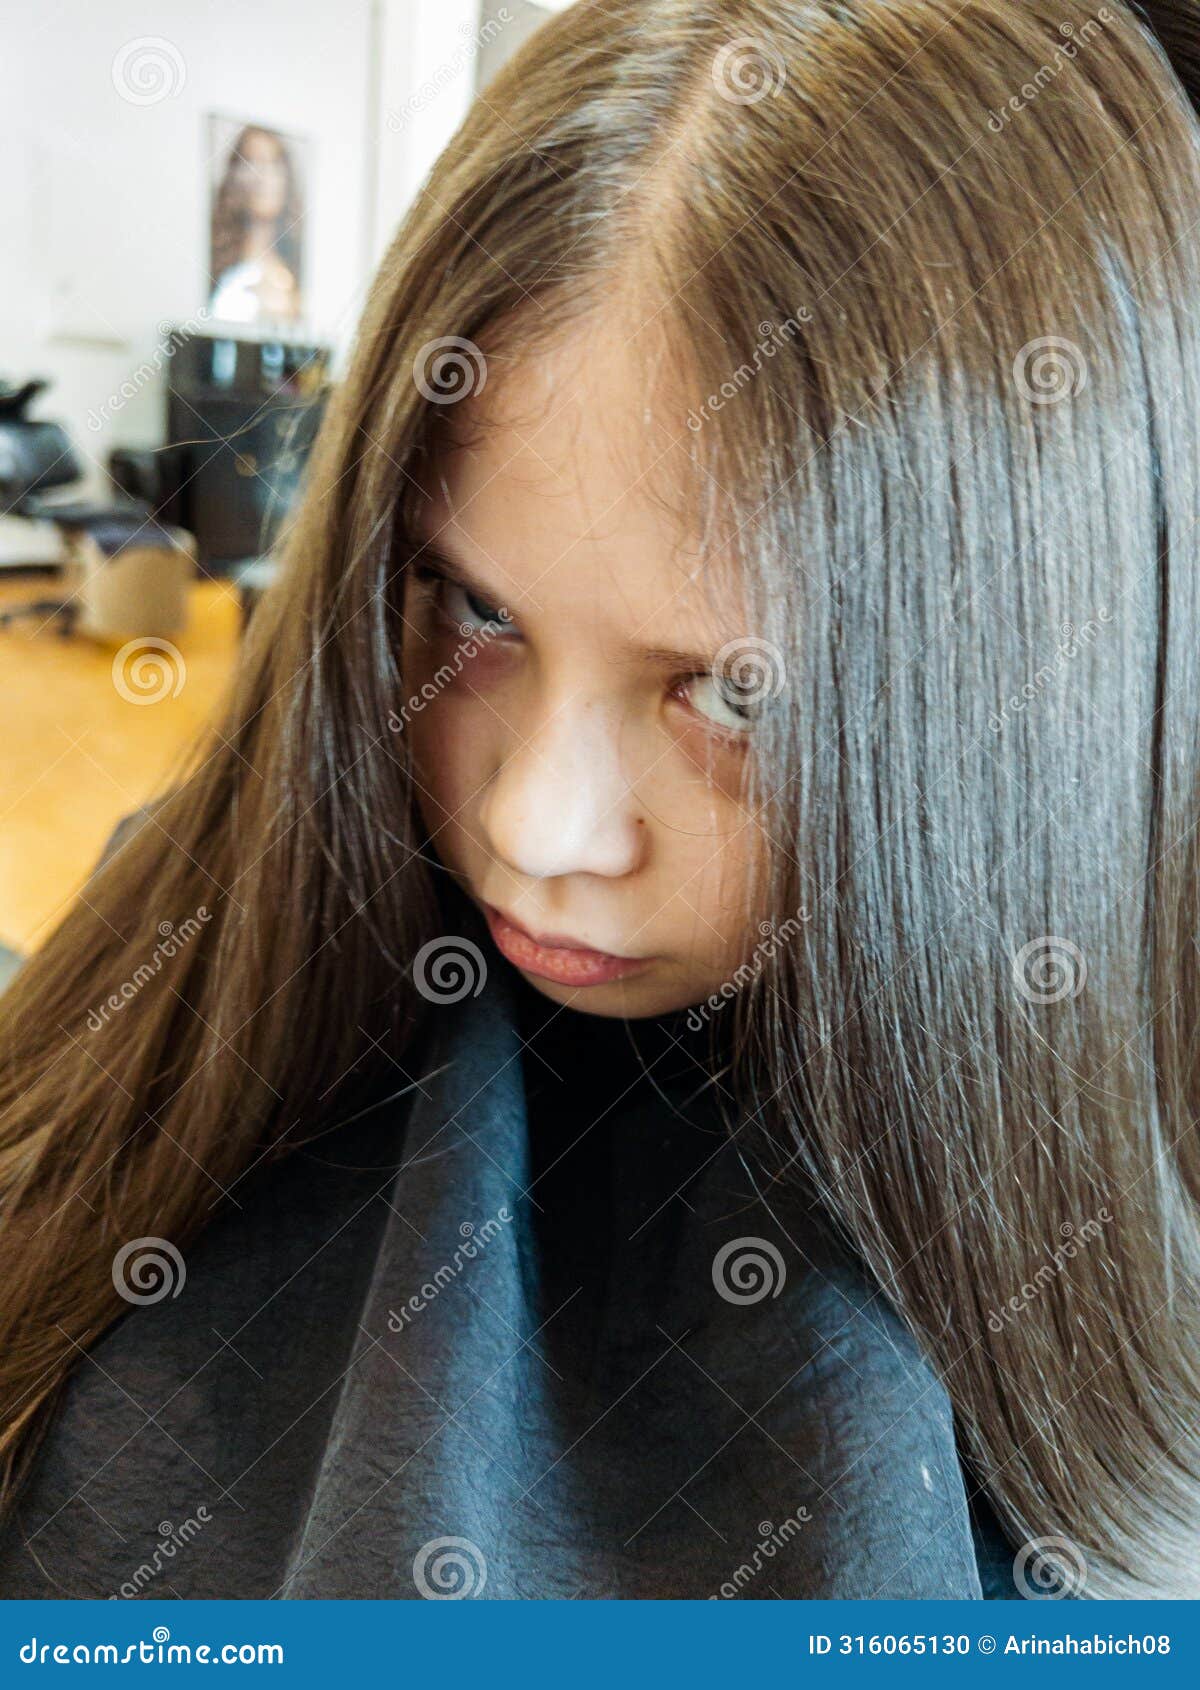 final touches with a hair dryer on a little girl's fresh cut